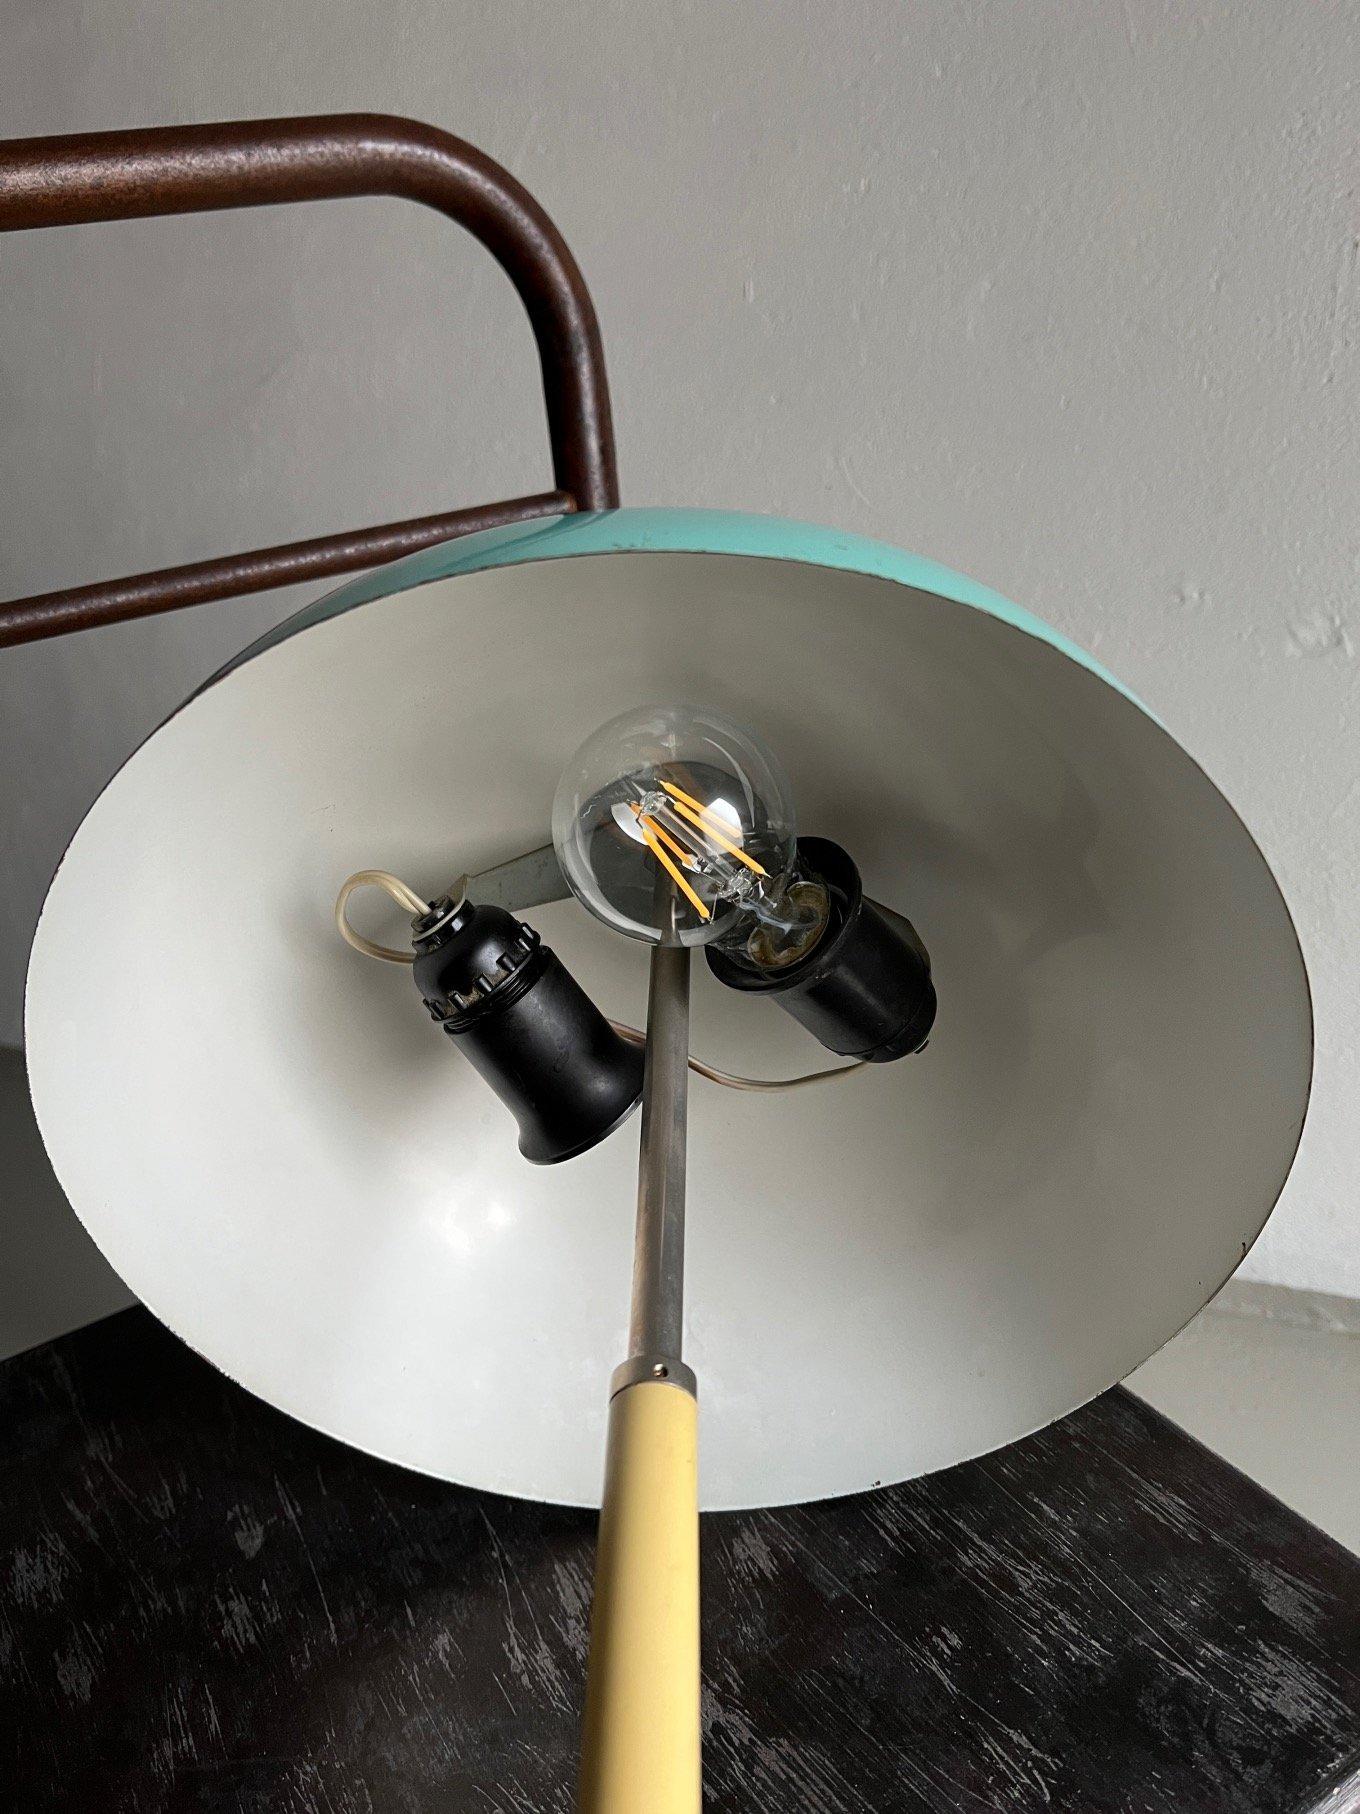 Mint blue painted metal desk lamp with beige plastic handle designed and produced in the USSR. There’s no original button, it has been changed.

Additional information:
Country of manufacture: USSR
Design period: 1970s
Dimensions: 30 D x 46 H